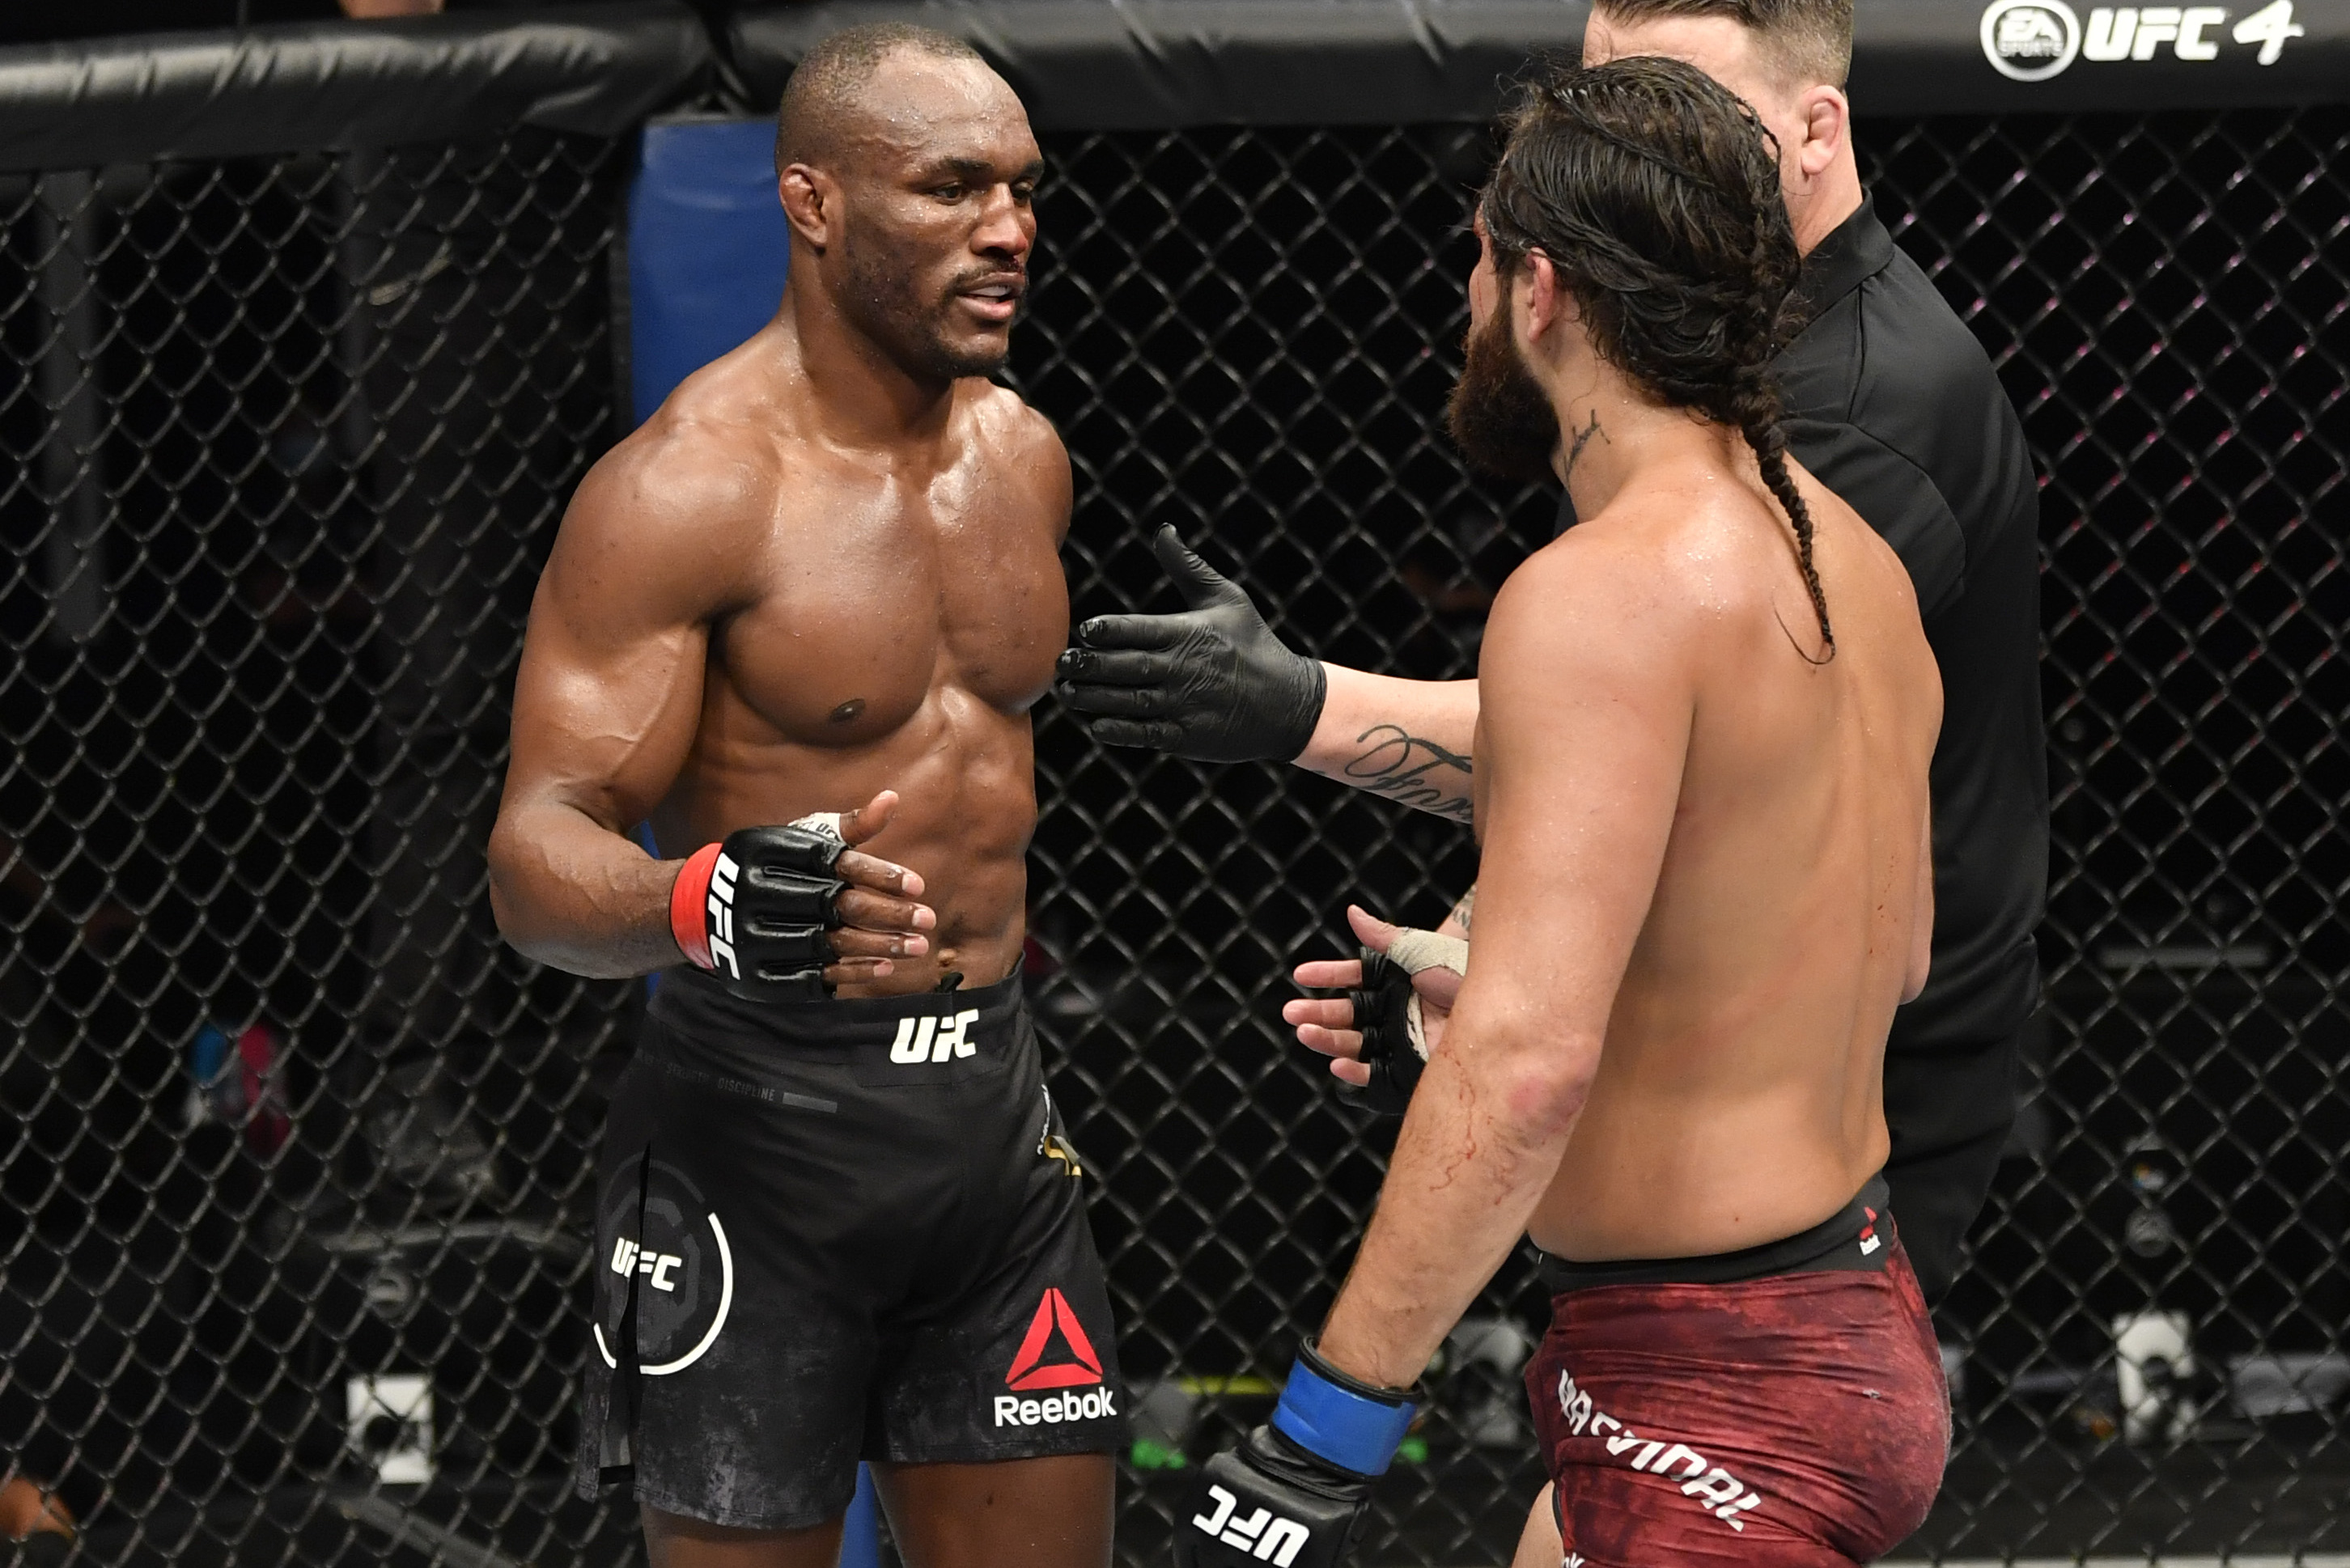 UFC 251 Results: Key Takeaways from Usman vs. Masvidal Card | Bleacher Report | Latest News, Videos and Highlights